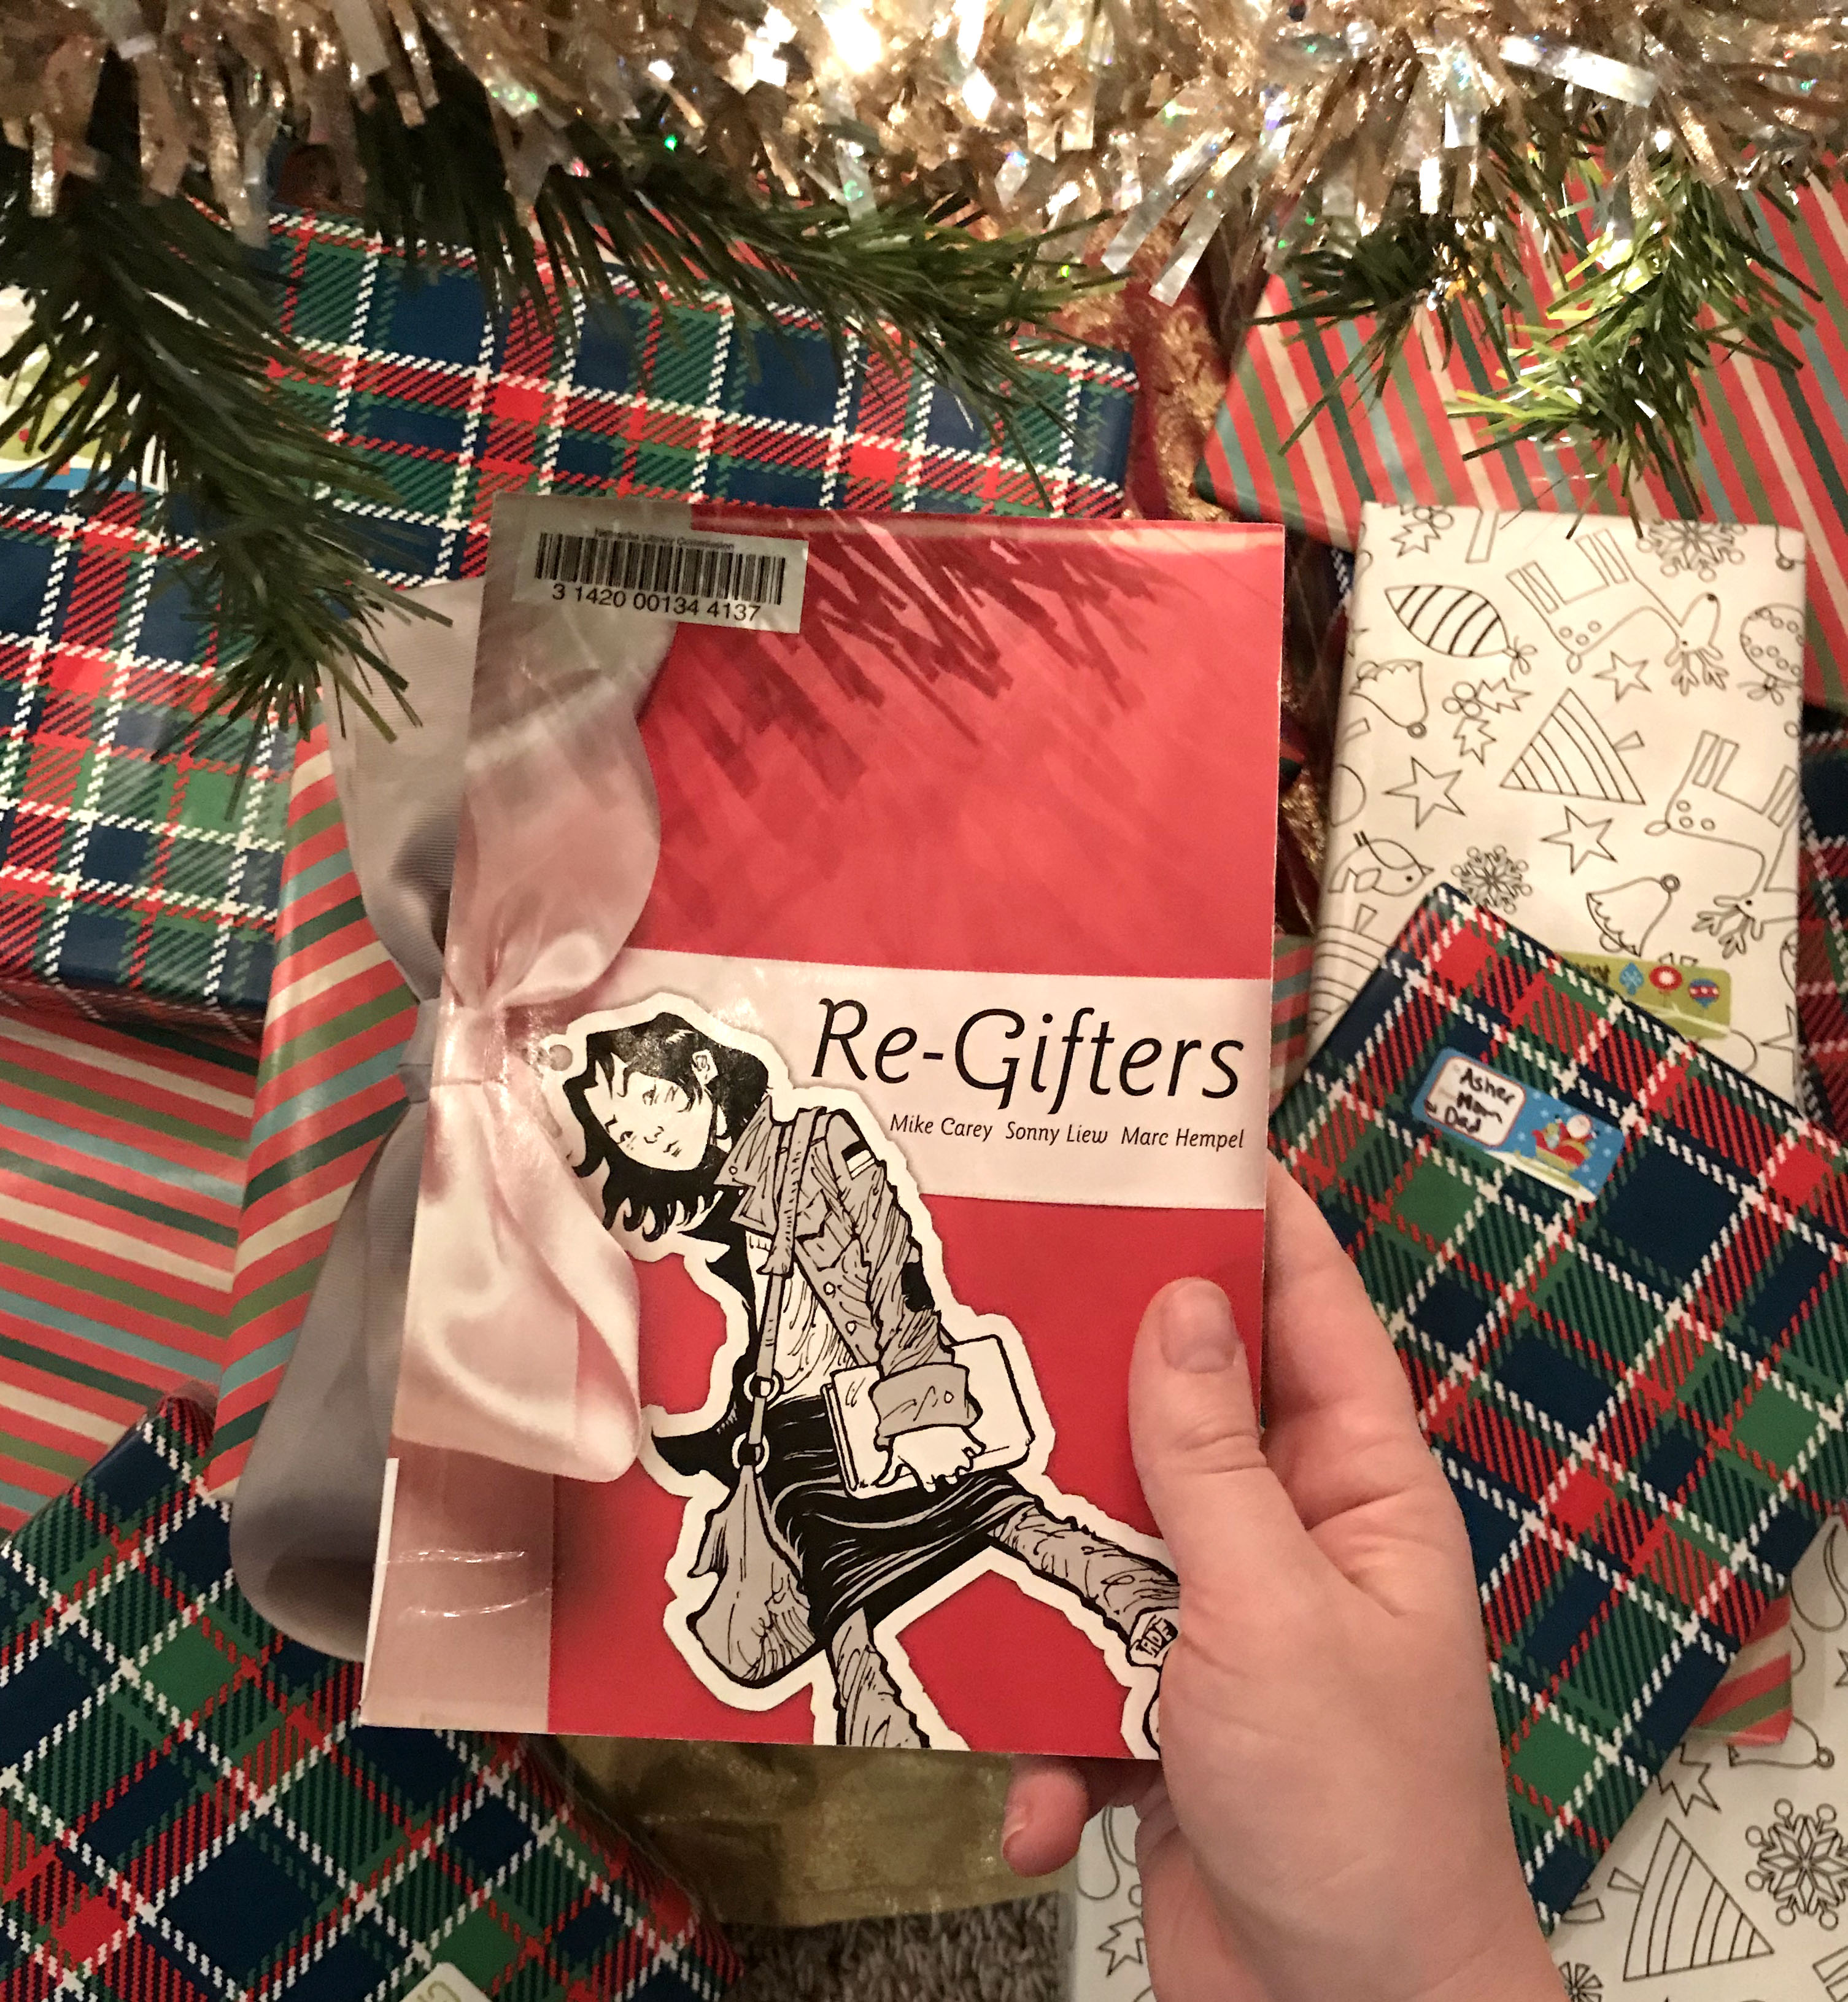 "Re-Gifters" by Mike Carey BookFace